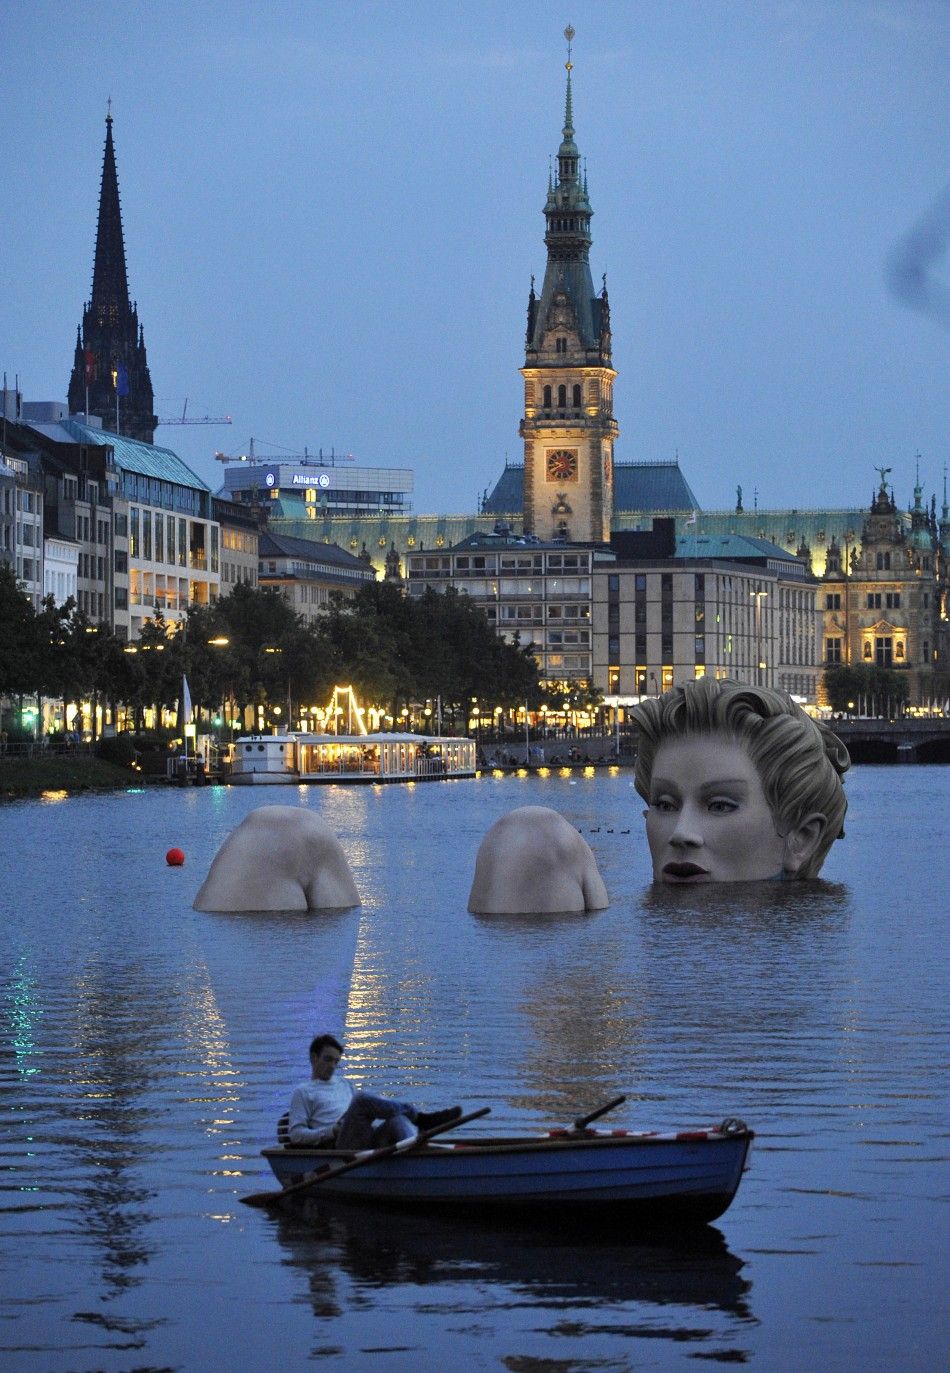 Man in a rowing boat floats near a 039mermaid039 sculpture created by Oliver Voss on Alster lake in Hamburg